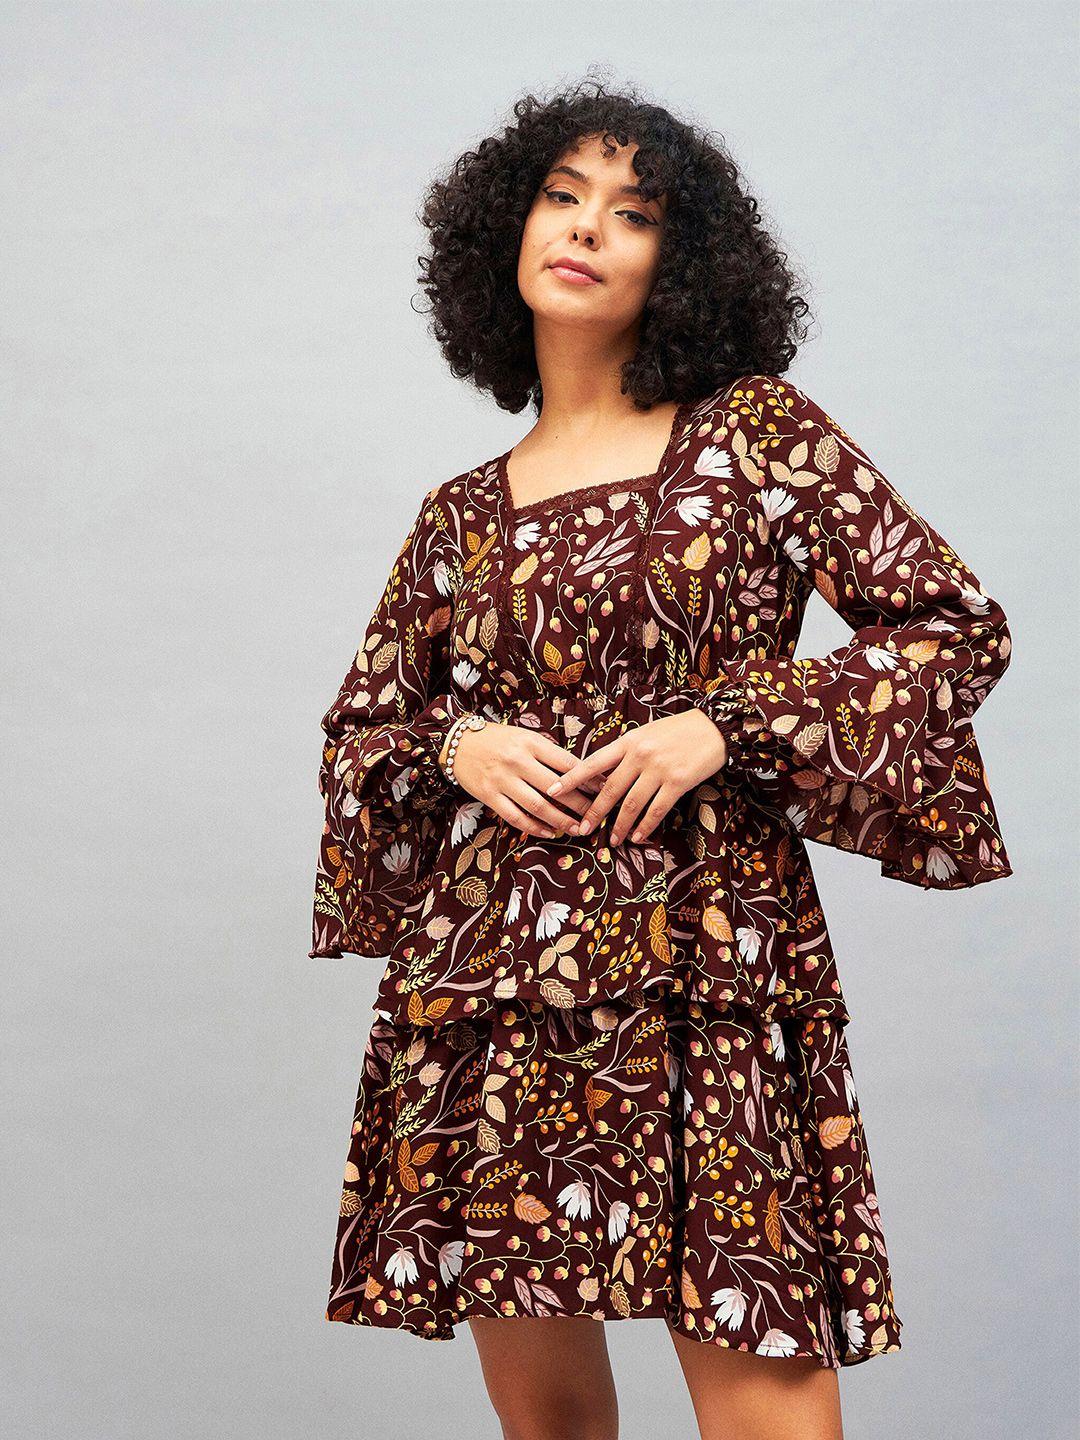 sassafras brown floral printed bell sleeves layered fit & flare mini dress